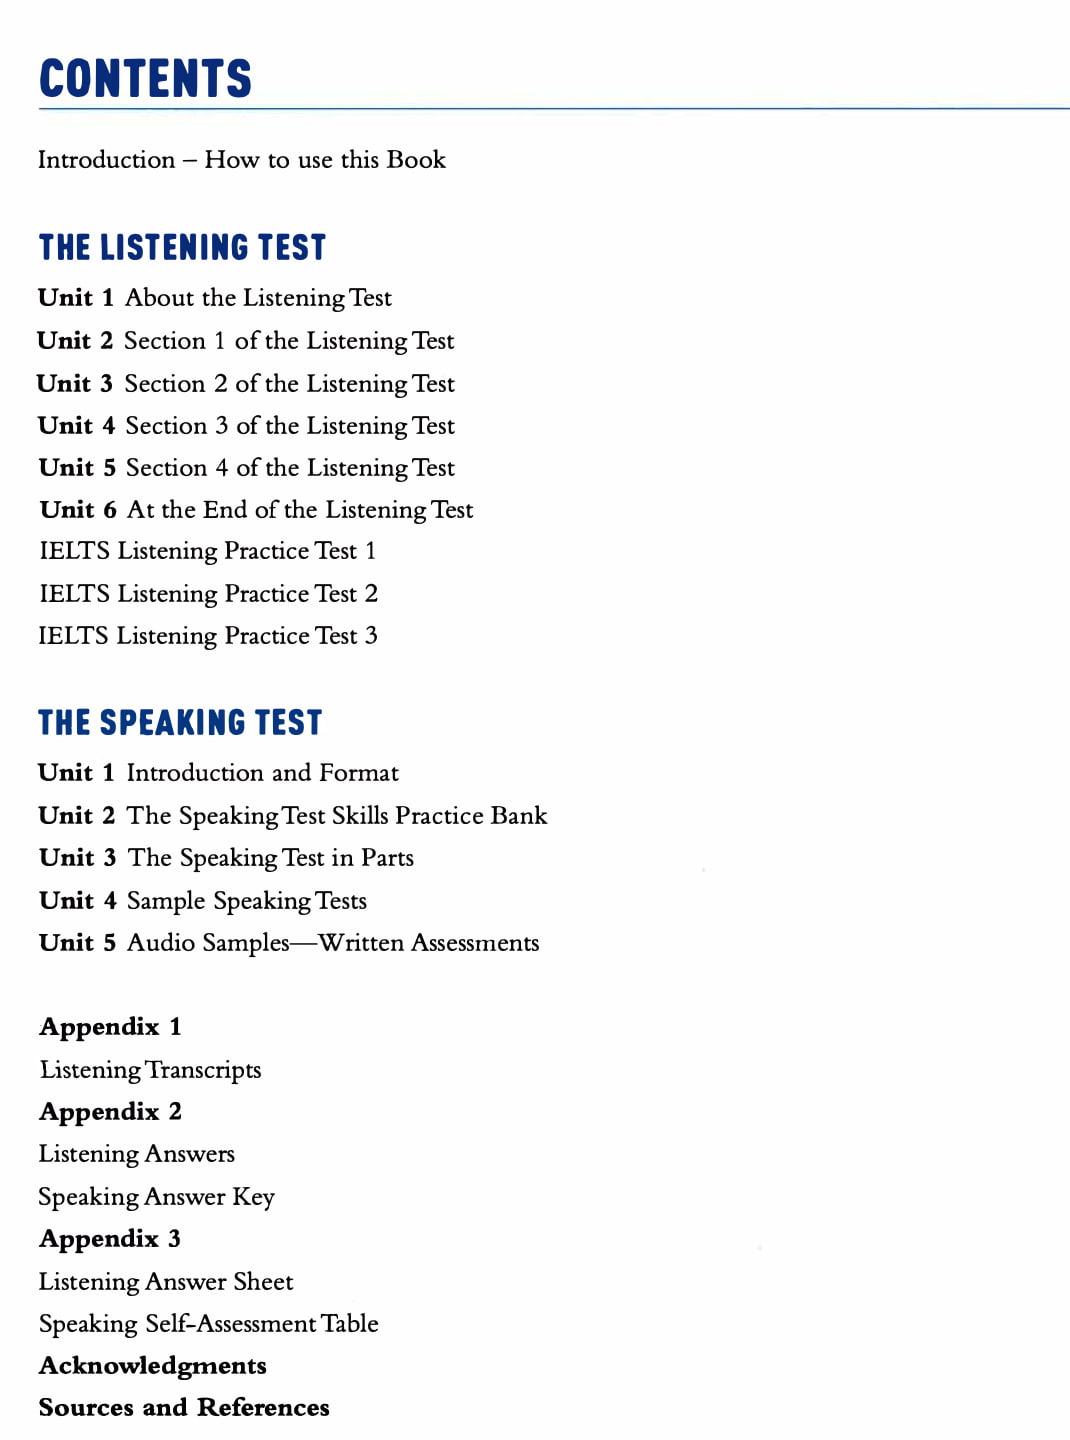 Download IELTS Preparation And Practice Listen and Speaking PDF with audio